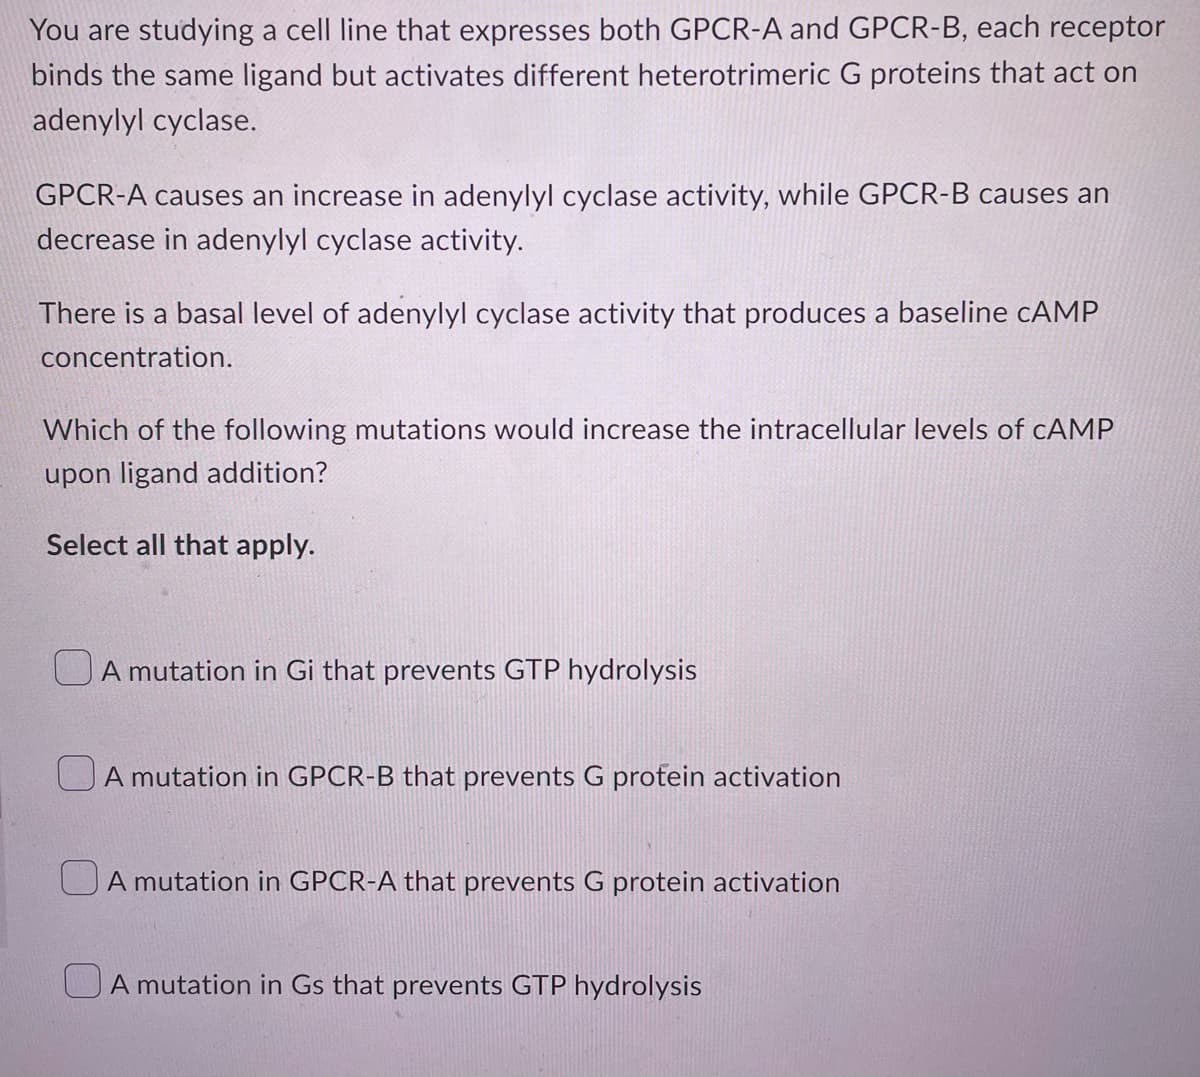 You are studying a cell line that expresses both GPCR-A and GPCR-B, each receptor
binds the same ligand but activates different heterotrimeric G proteins that act on
adenylyl cyclase.
GPCR-A causes an increase in adenylyl cyclase activity, while GPCR-B causes an
decrease in adenylyl cyclase activity.
There is a basal level of adenylyl cyclase activity that produces a baseline CAMP
concentration.
Which of the following mutations would increase the intracellular levels of CAMP
upon ligand addition?
Select all that apply.
A mutation in Gi that prevents GTP hydrolysis
A mutation in GPCR-B that prevents G protein activation
A mutation in GPCR-A that prevents G protein activation
A mutation in Gs that prevents GTP hydrolysis